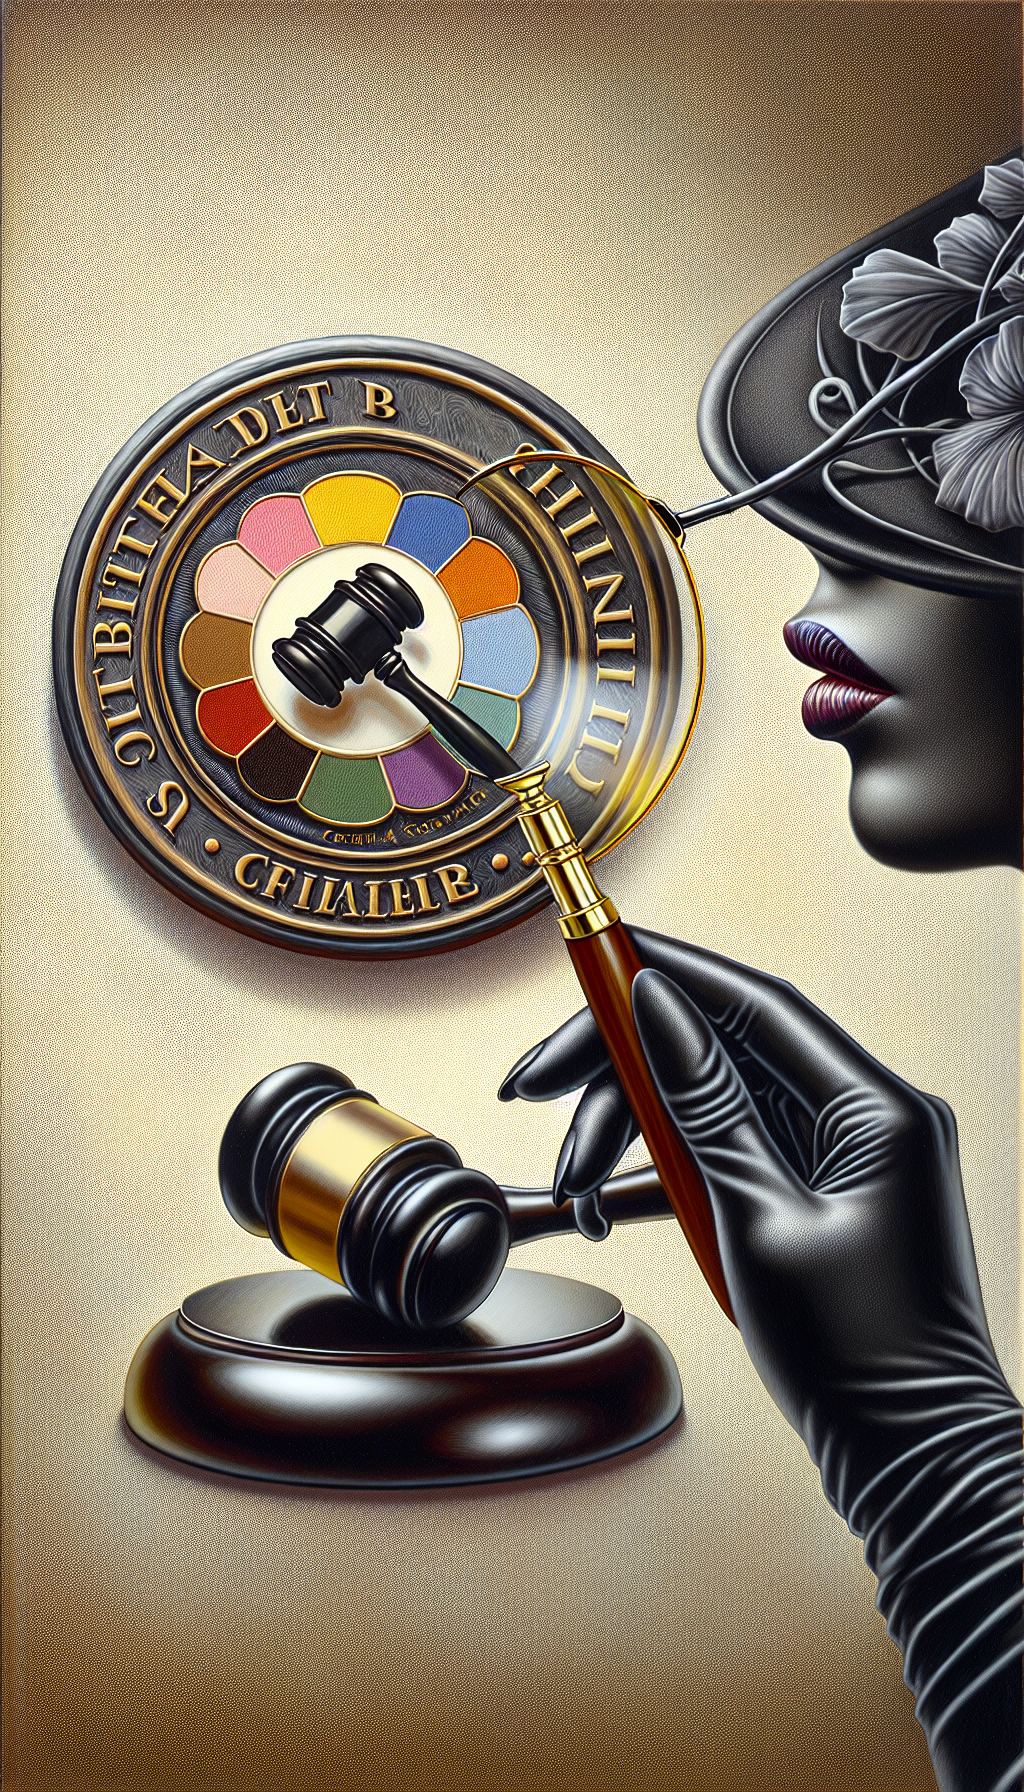 An illustration featuring a magnifying glass held by an elegantly gloved hand (representing scrutiny and professionalism) examining a vibrant, textured certification seal emblazoned with a palette and gavel. In the background, a map pin drops onto a nearby gallery, inscribed with "Certified Appraiser Here." Styles range from hyper-realistic detail on the seal to impressionistic strokes on the background elements.